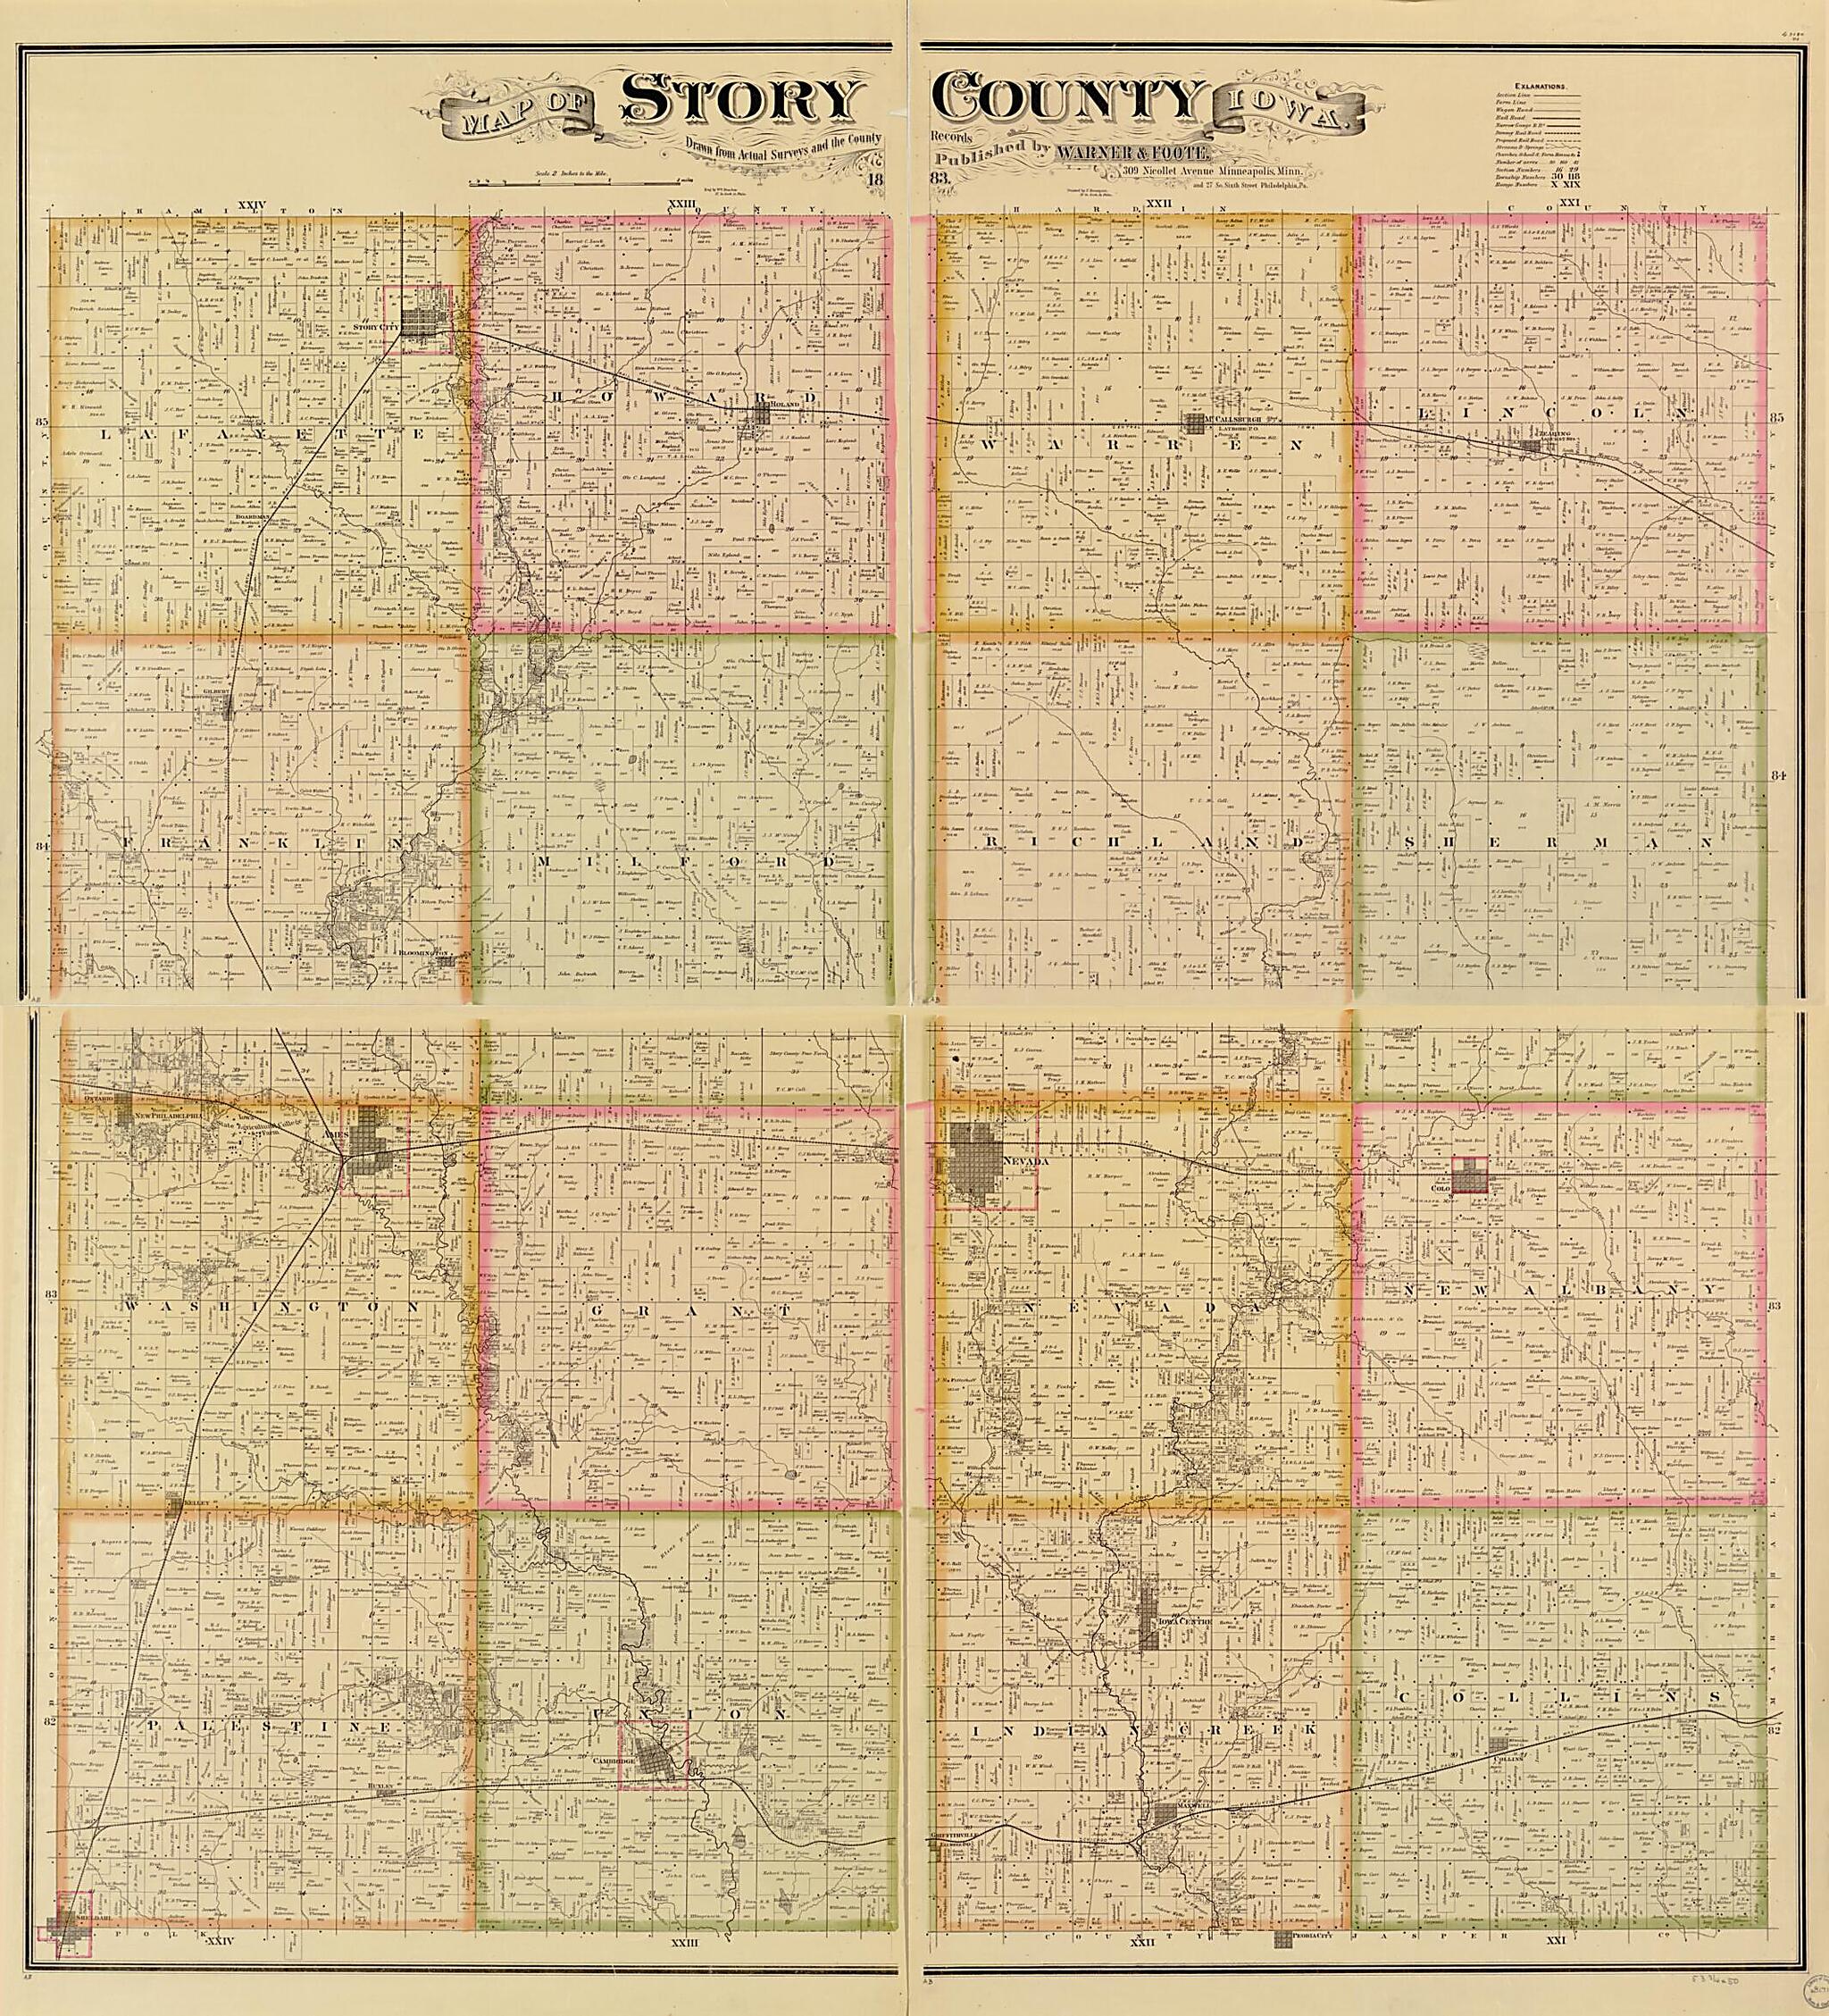 This old map of Map of Story County, Iowa : Drawn from Actual Surveys and the County Records from 1883 was created by  Warner &amp; Foote in 1883